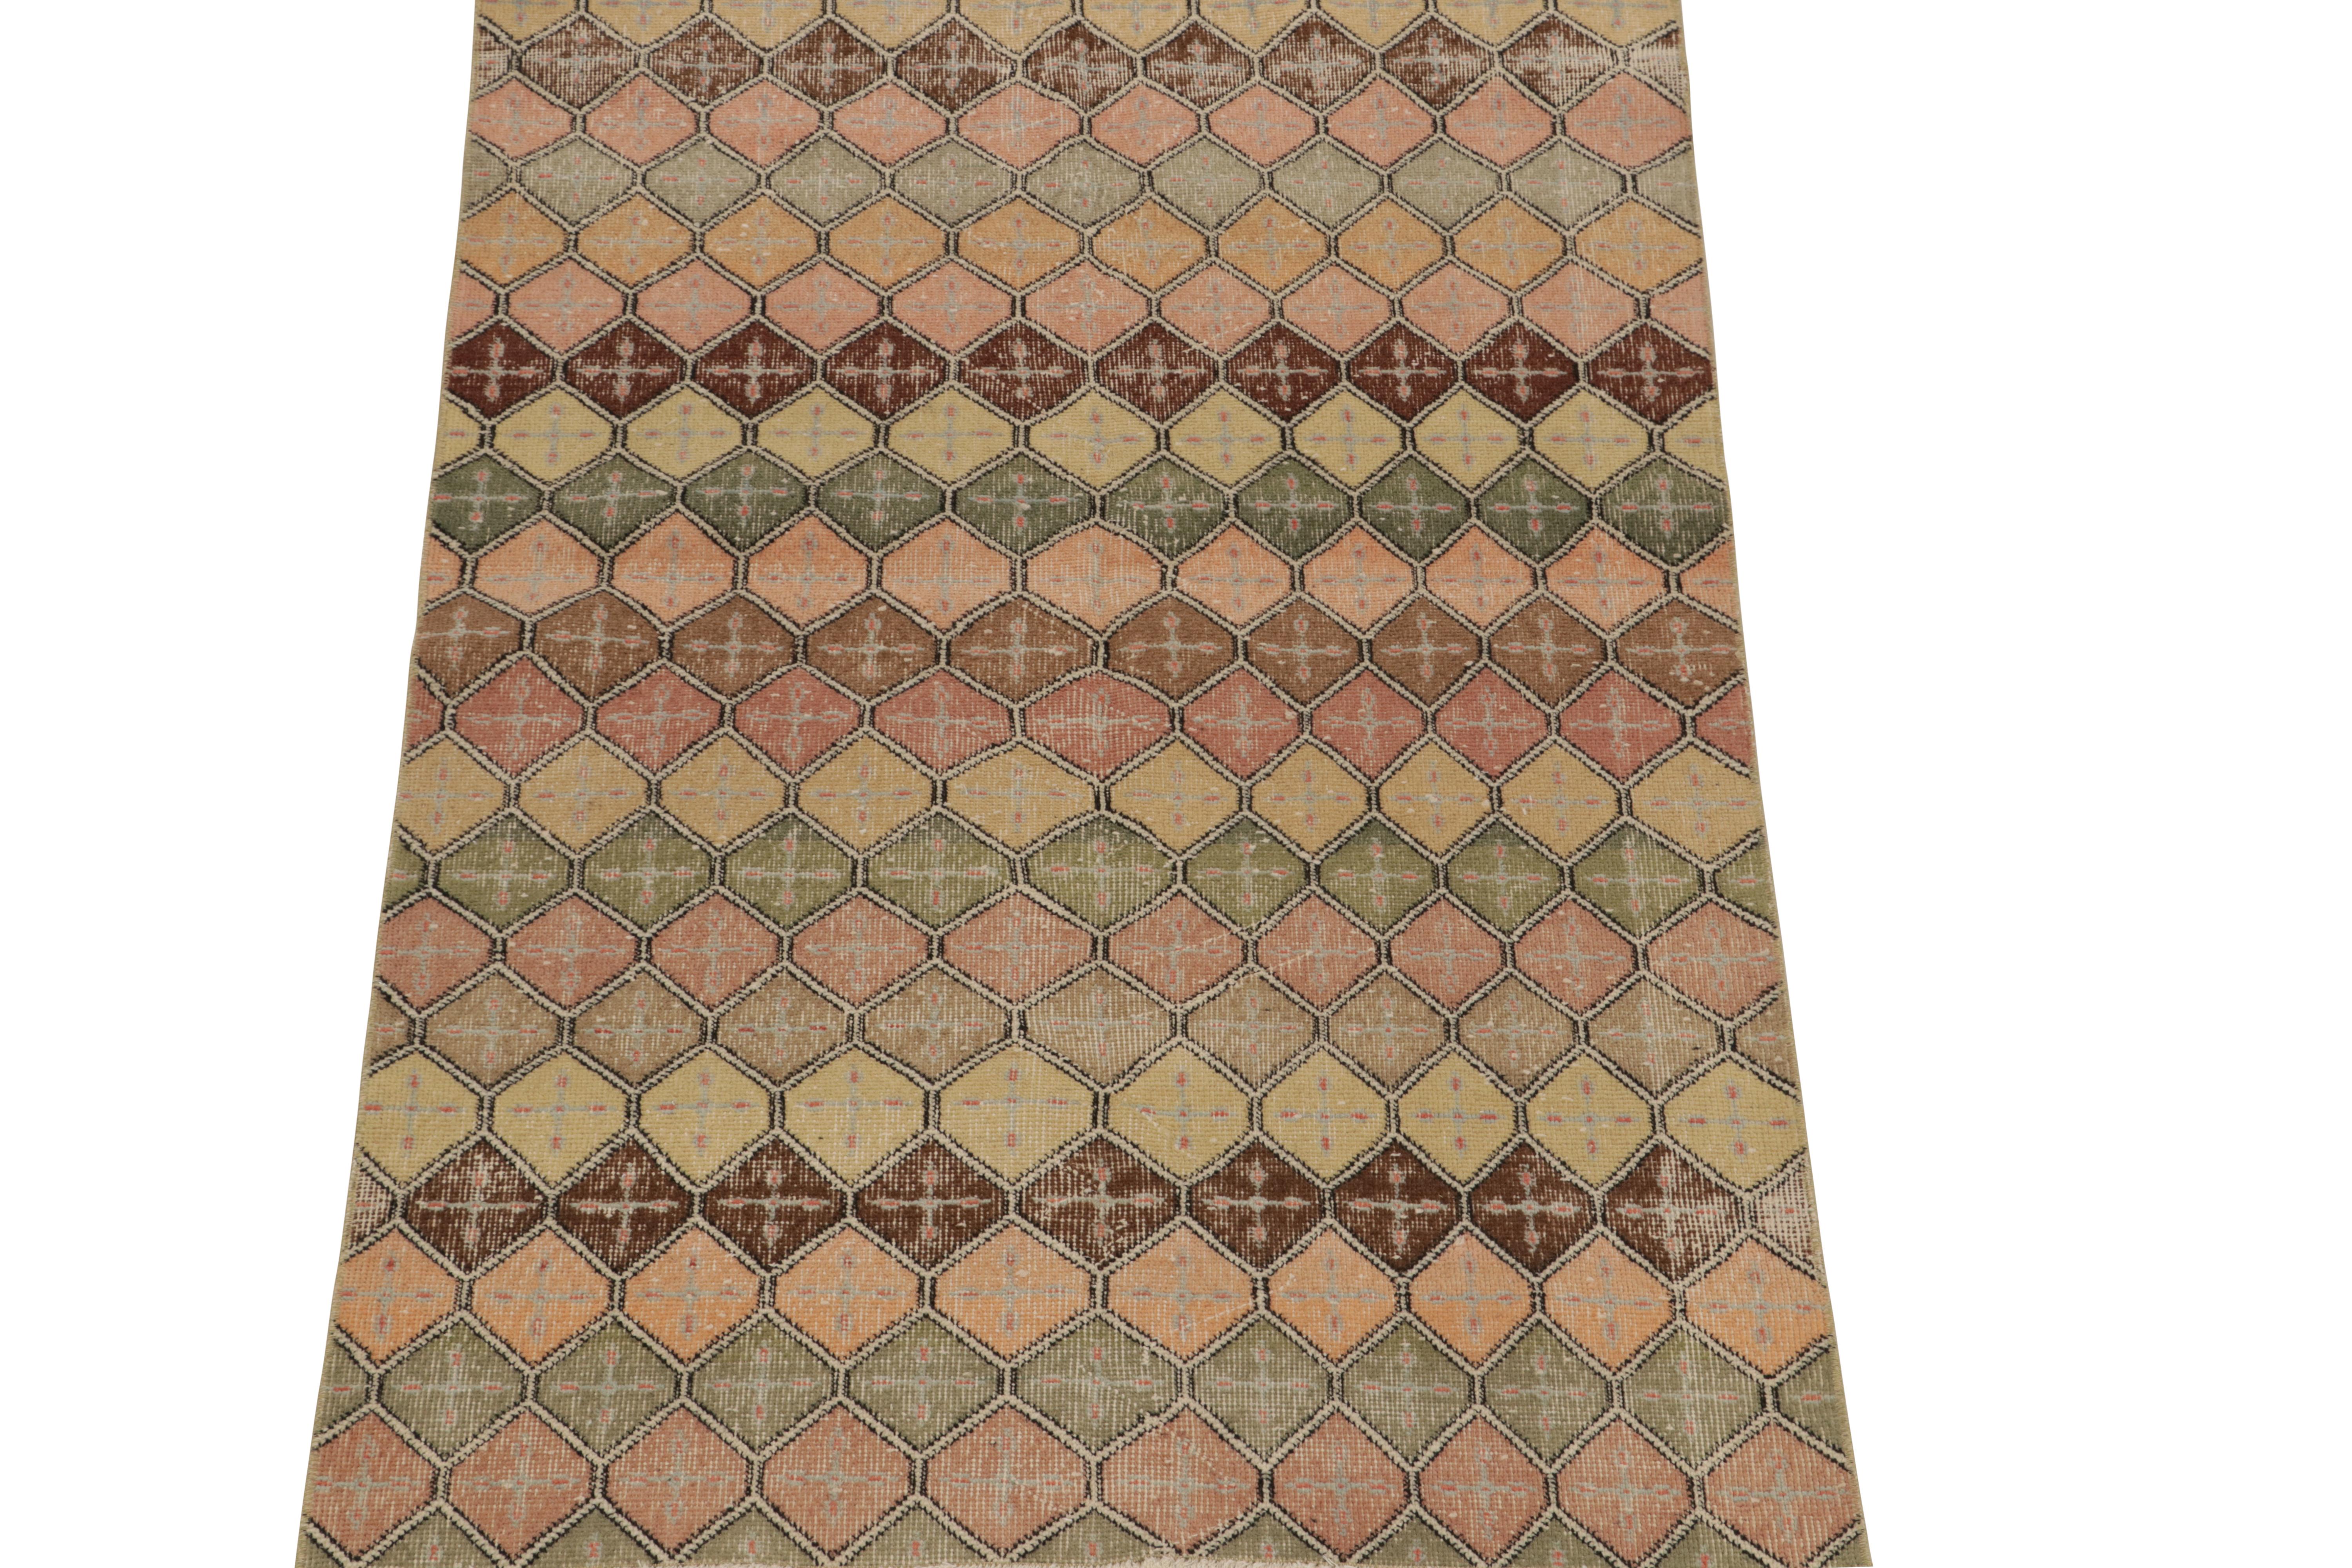 This vintage 6x8 rug is a new addition to Rug & Kilim’s commemorative Mid-Century Pasha Collection. This line is a commemoration of rare curations we believe to hail from mid-century Turkish designer Zeki Müren.

Further on the Design:

This